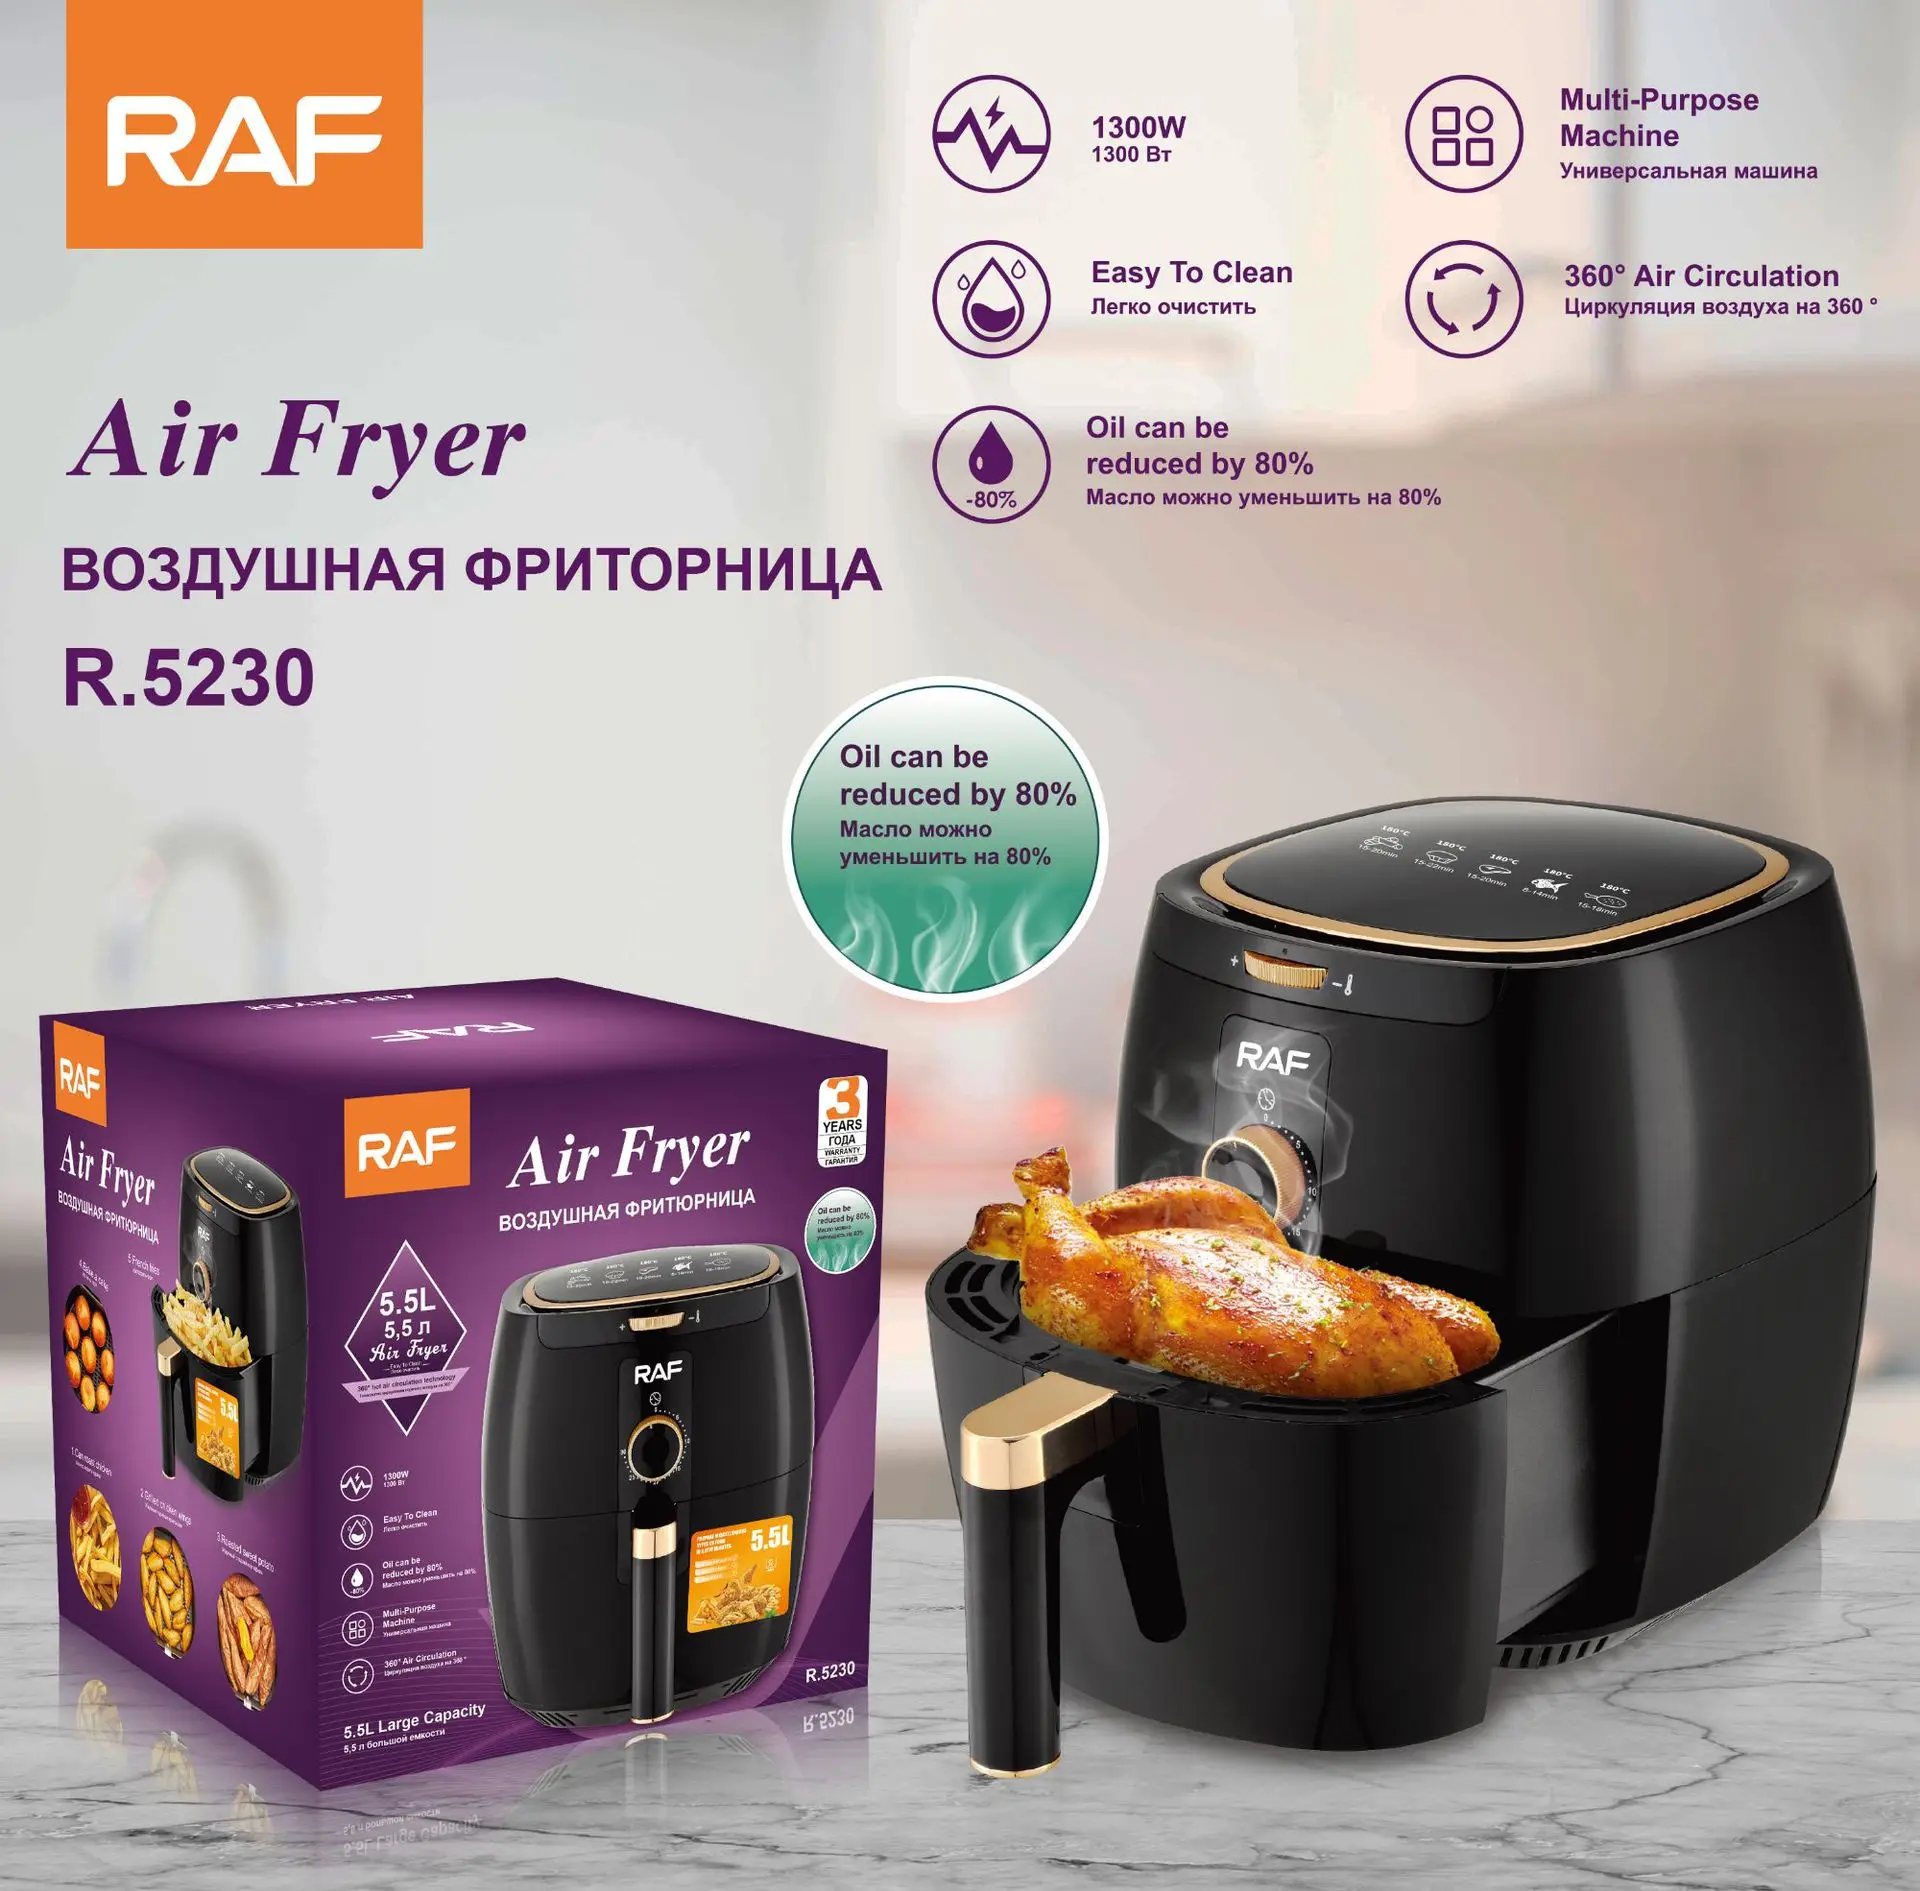 Smart Air Fryer 5-6L Large-capacity Household Multi-functional Smart Oil-free Smokeless Electric Oven Air Fryer 220V smart air fryer 3l large capacity household multi functional smart oil free smokeless electric oven kitchen air fryer 220v